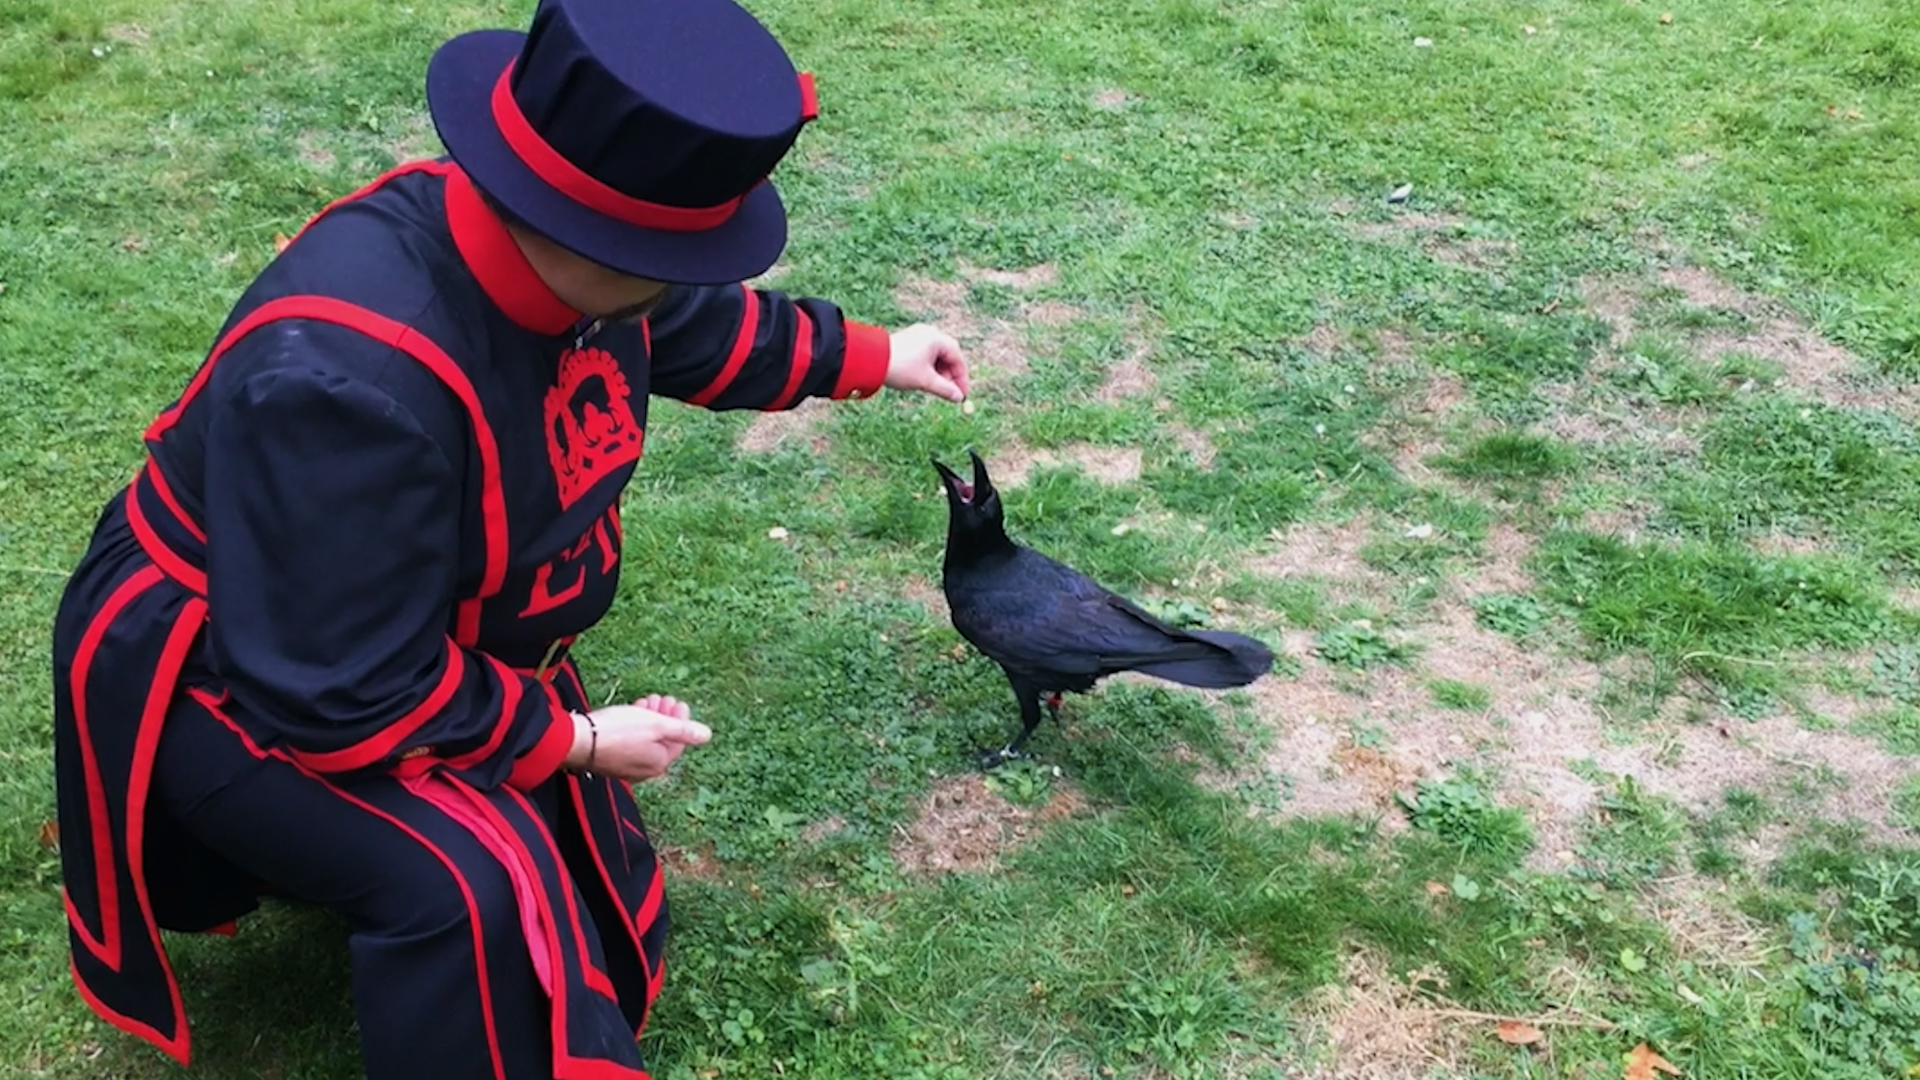 tower of london raven master